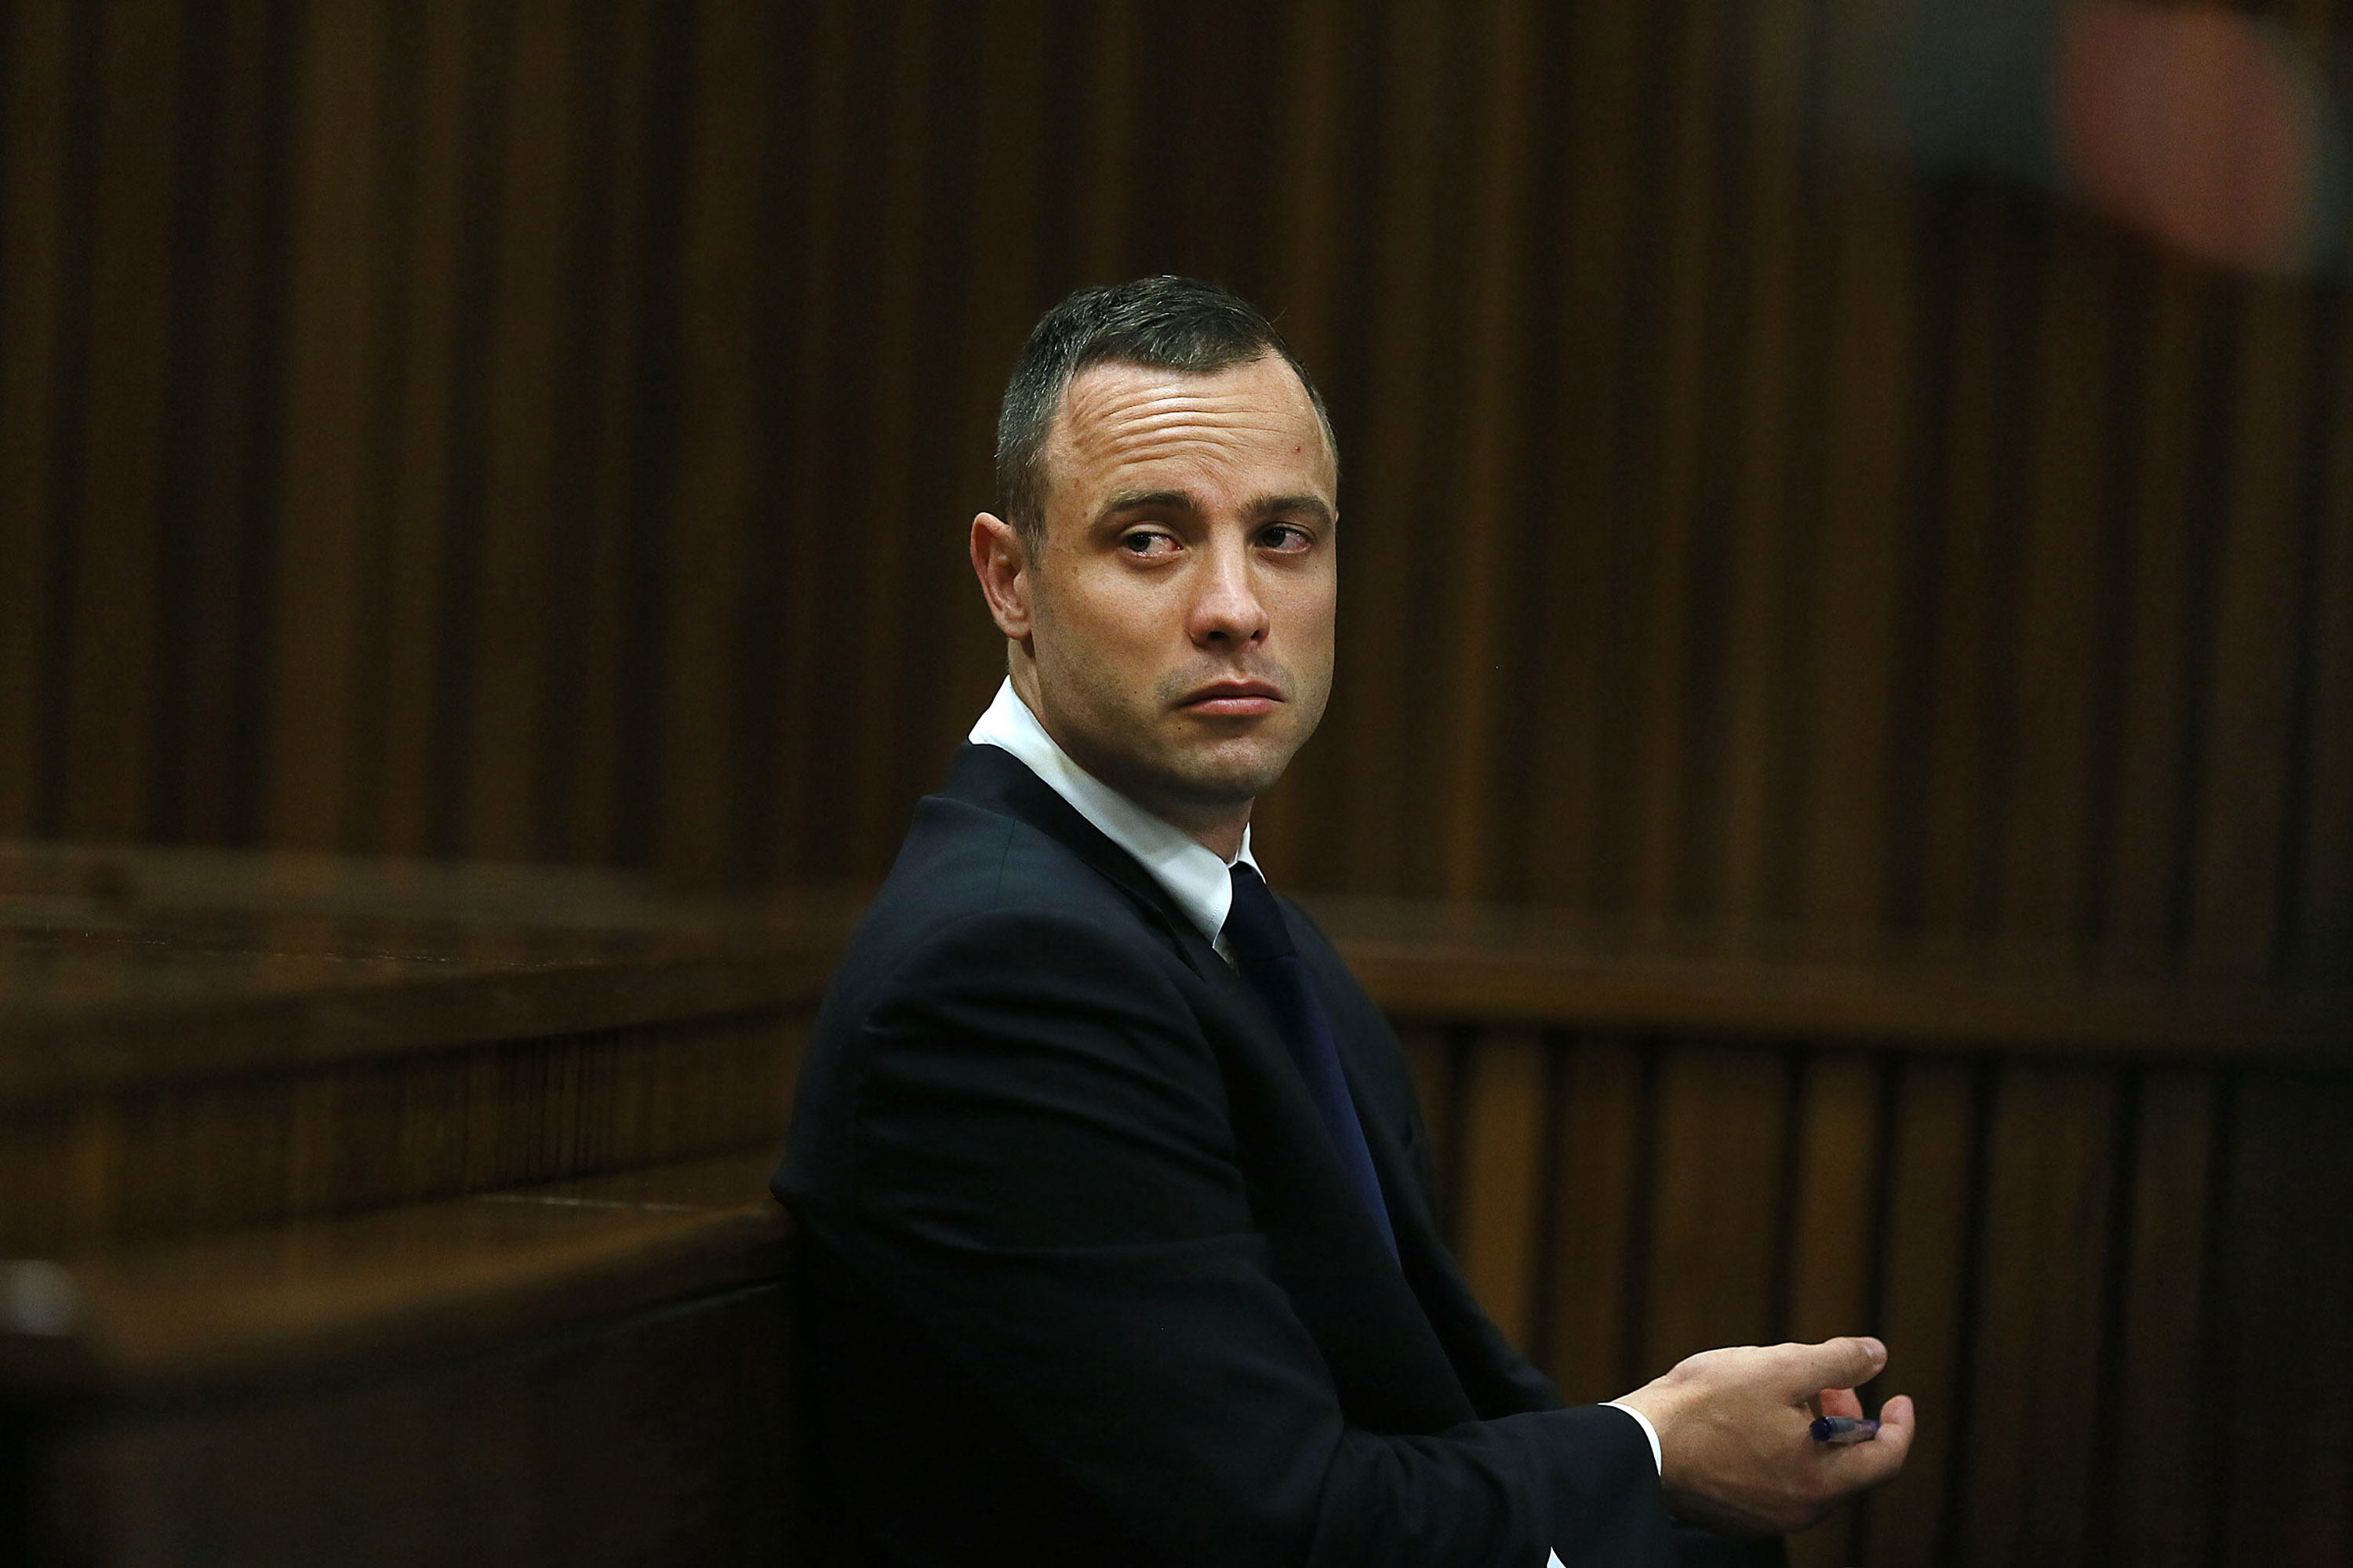 Oscar Pistorius in the Pretoria High Court on May 6, 2014, in Pretoria, South Africa. (Alon Skuy—The Times/Gallo Images/Getty Images)